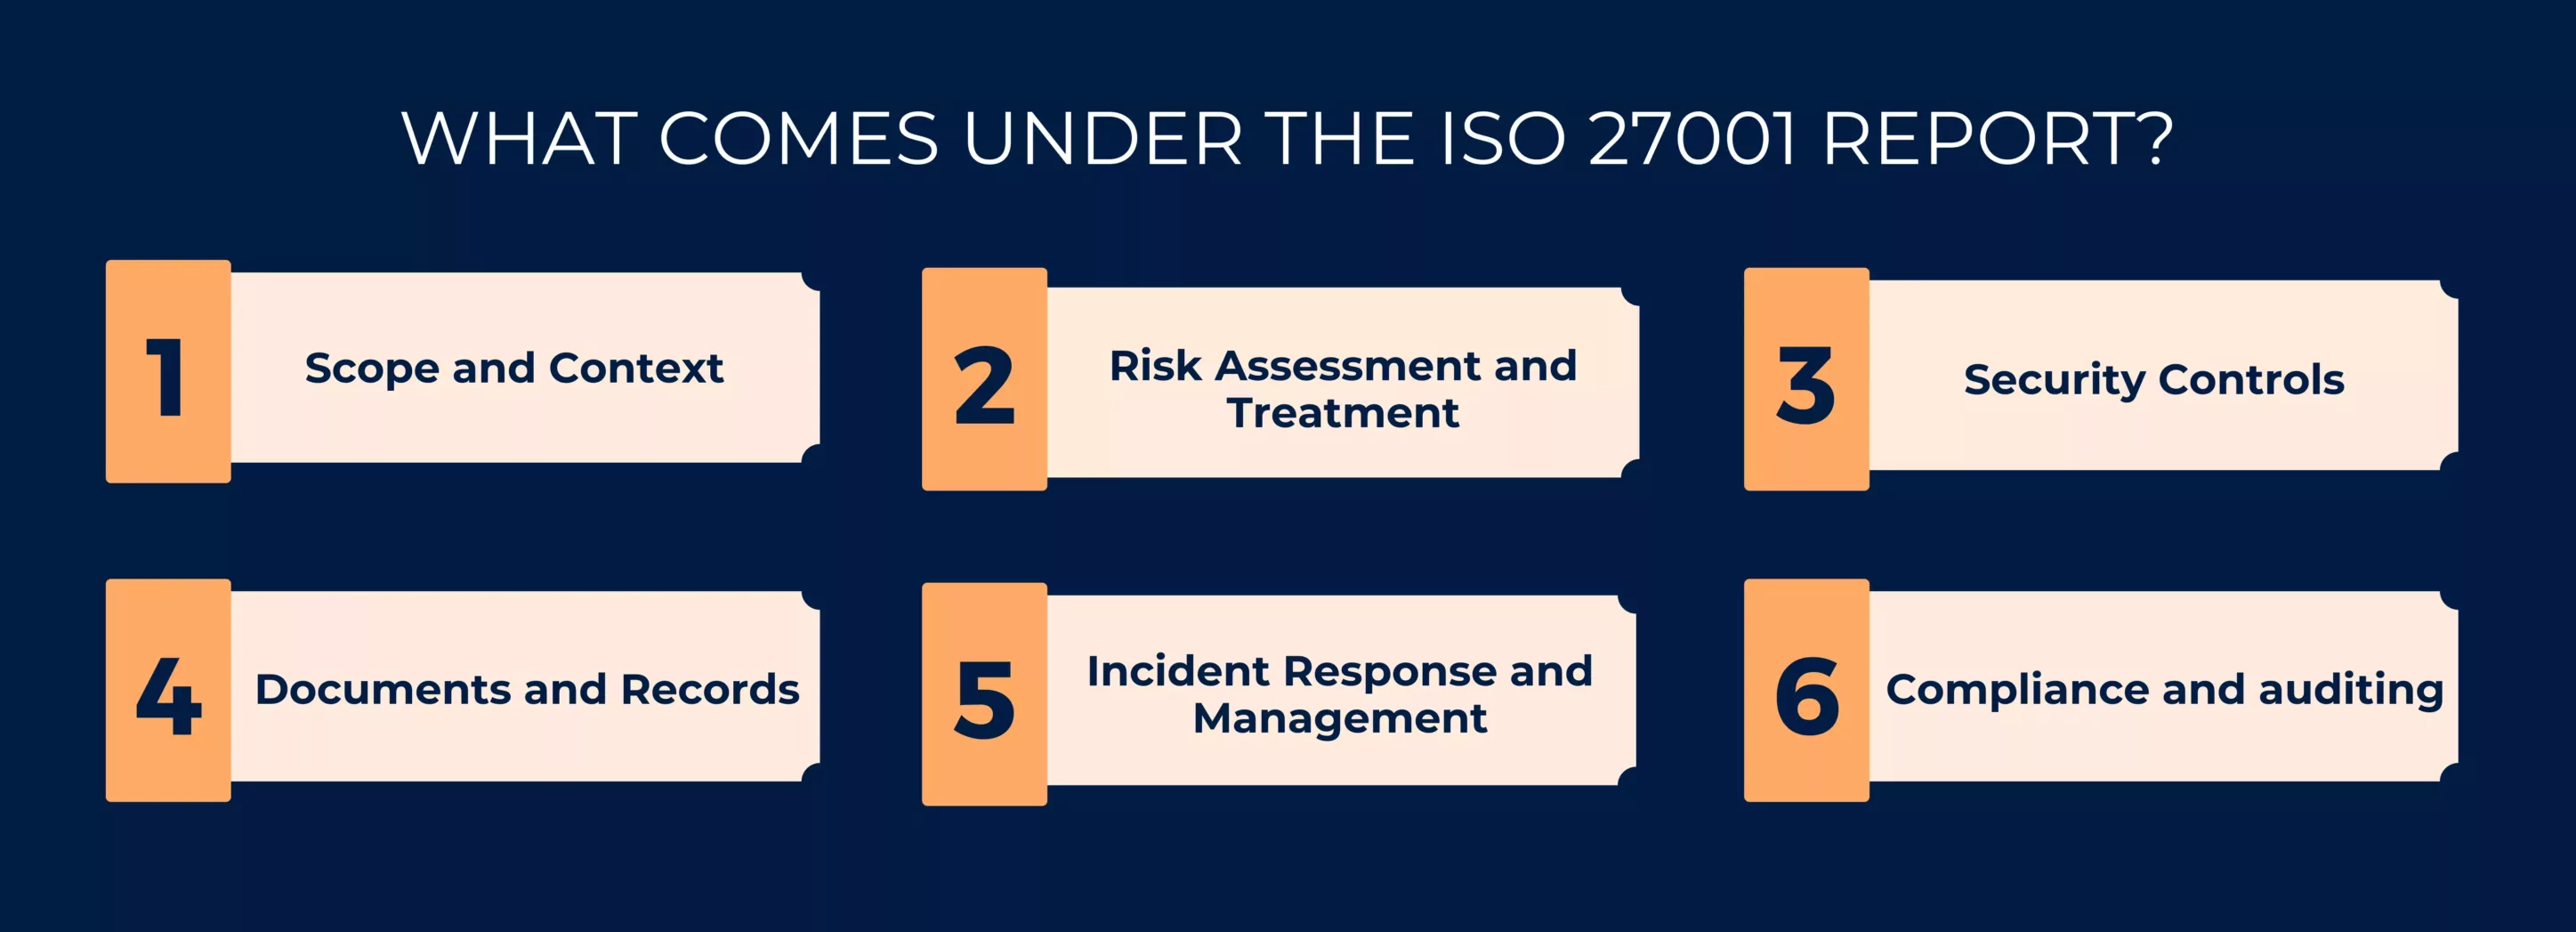 What comes under the ISO 27001 report